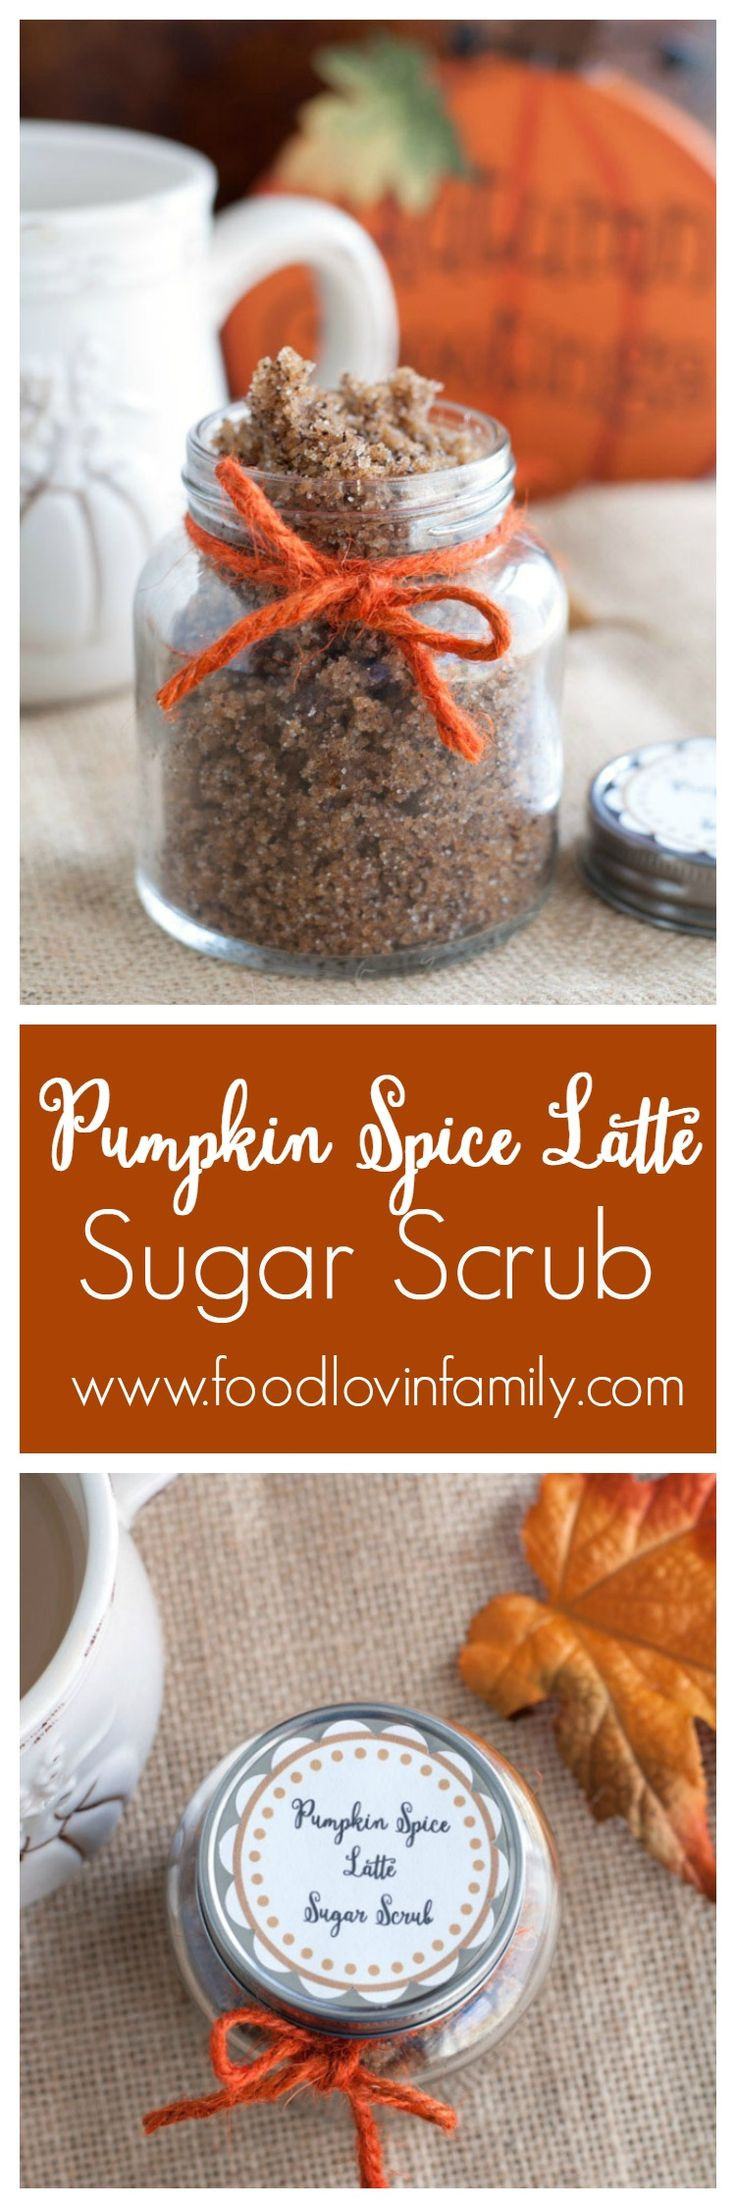 21 Fabulous Pumpkin Vases for Sale 2024 free download pumpkin vases for sale of 8 best goode holiday images on pinterest decorated bottles regarding make this pumpkin spice latte sugar scrub to celebrate autumn this beauty tutorial is an